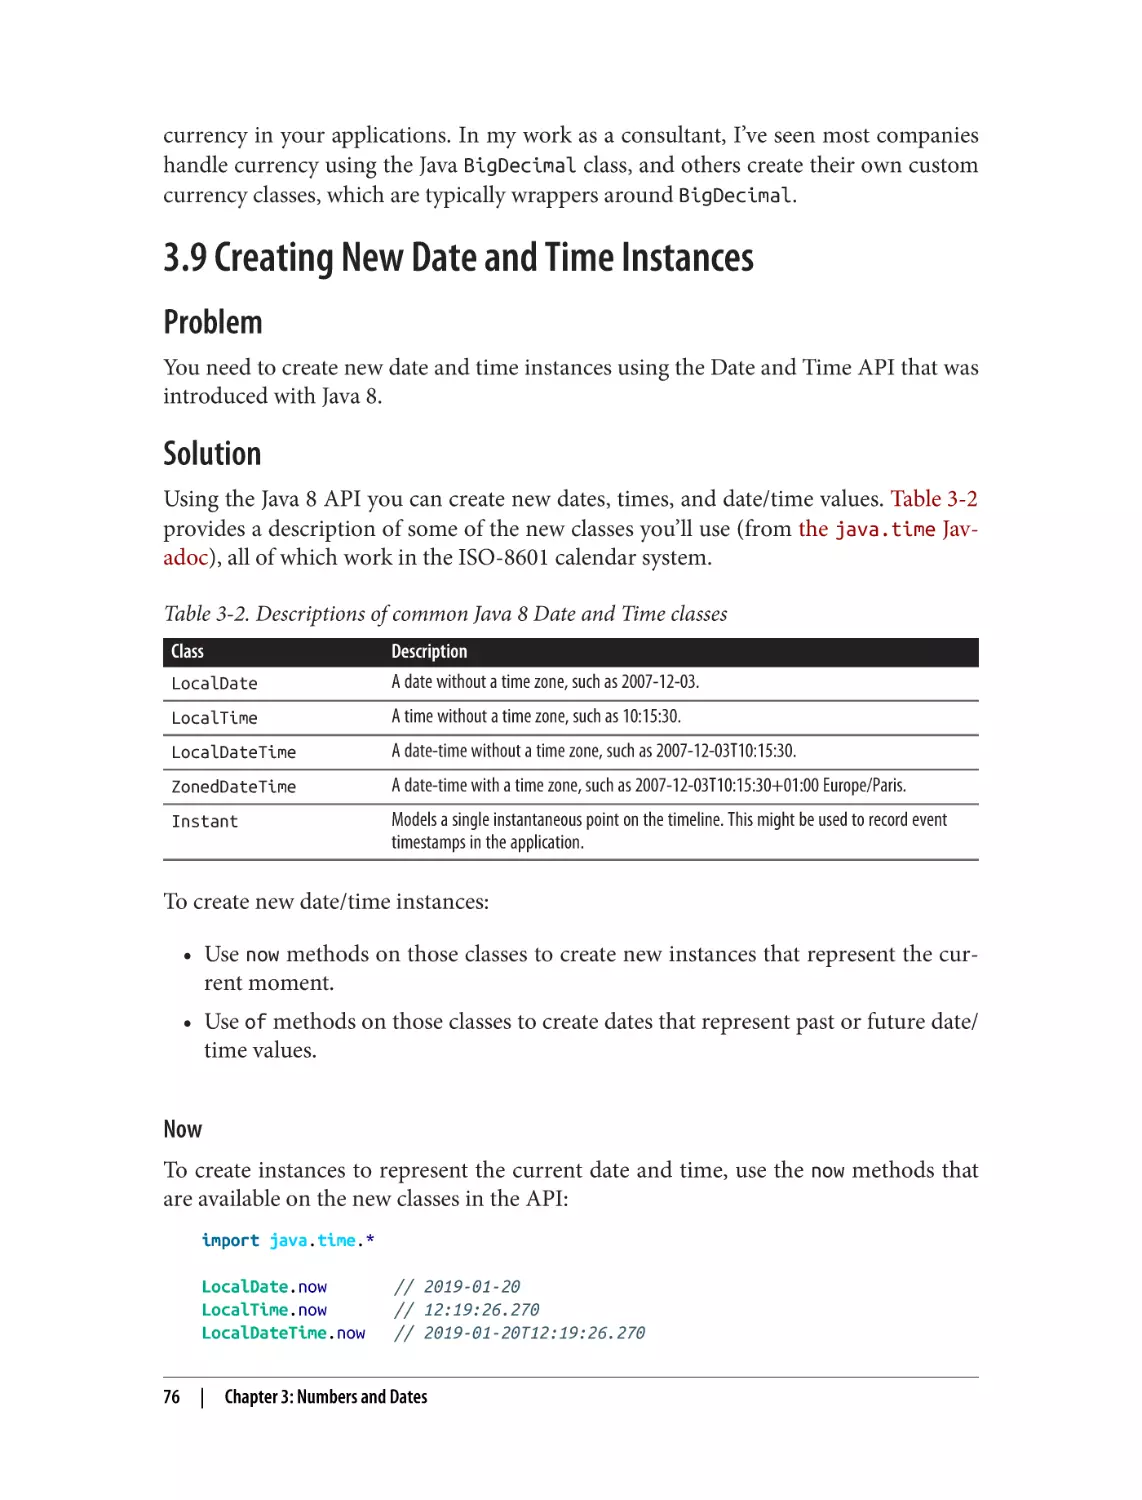 3.9 Creating New Date and Time Instances
Problem
Solution